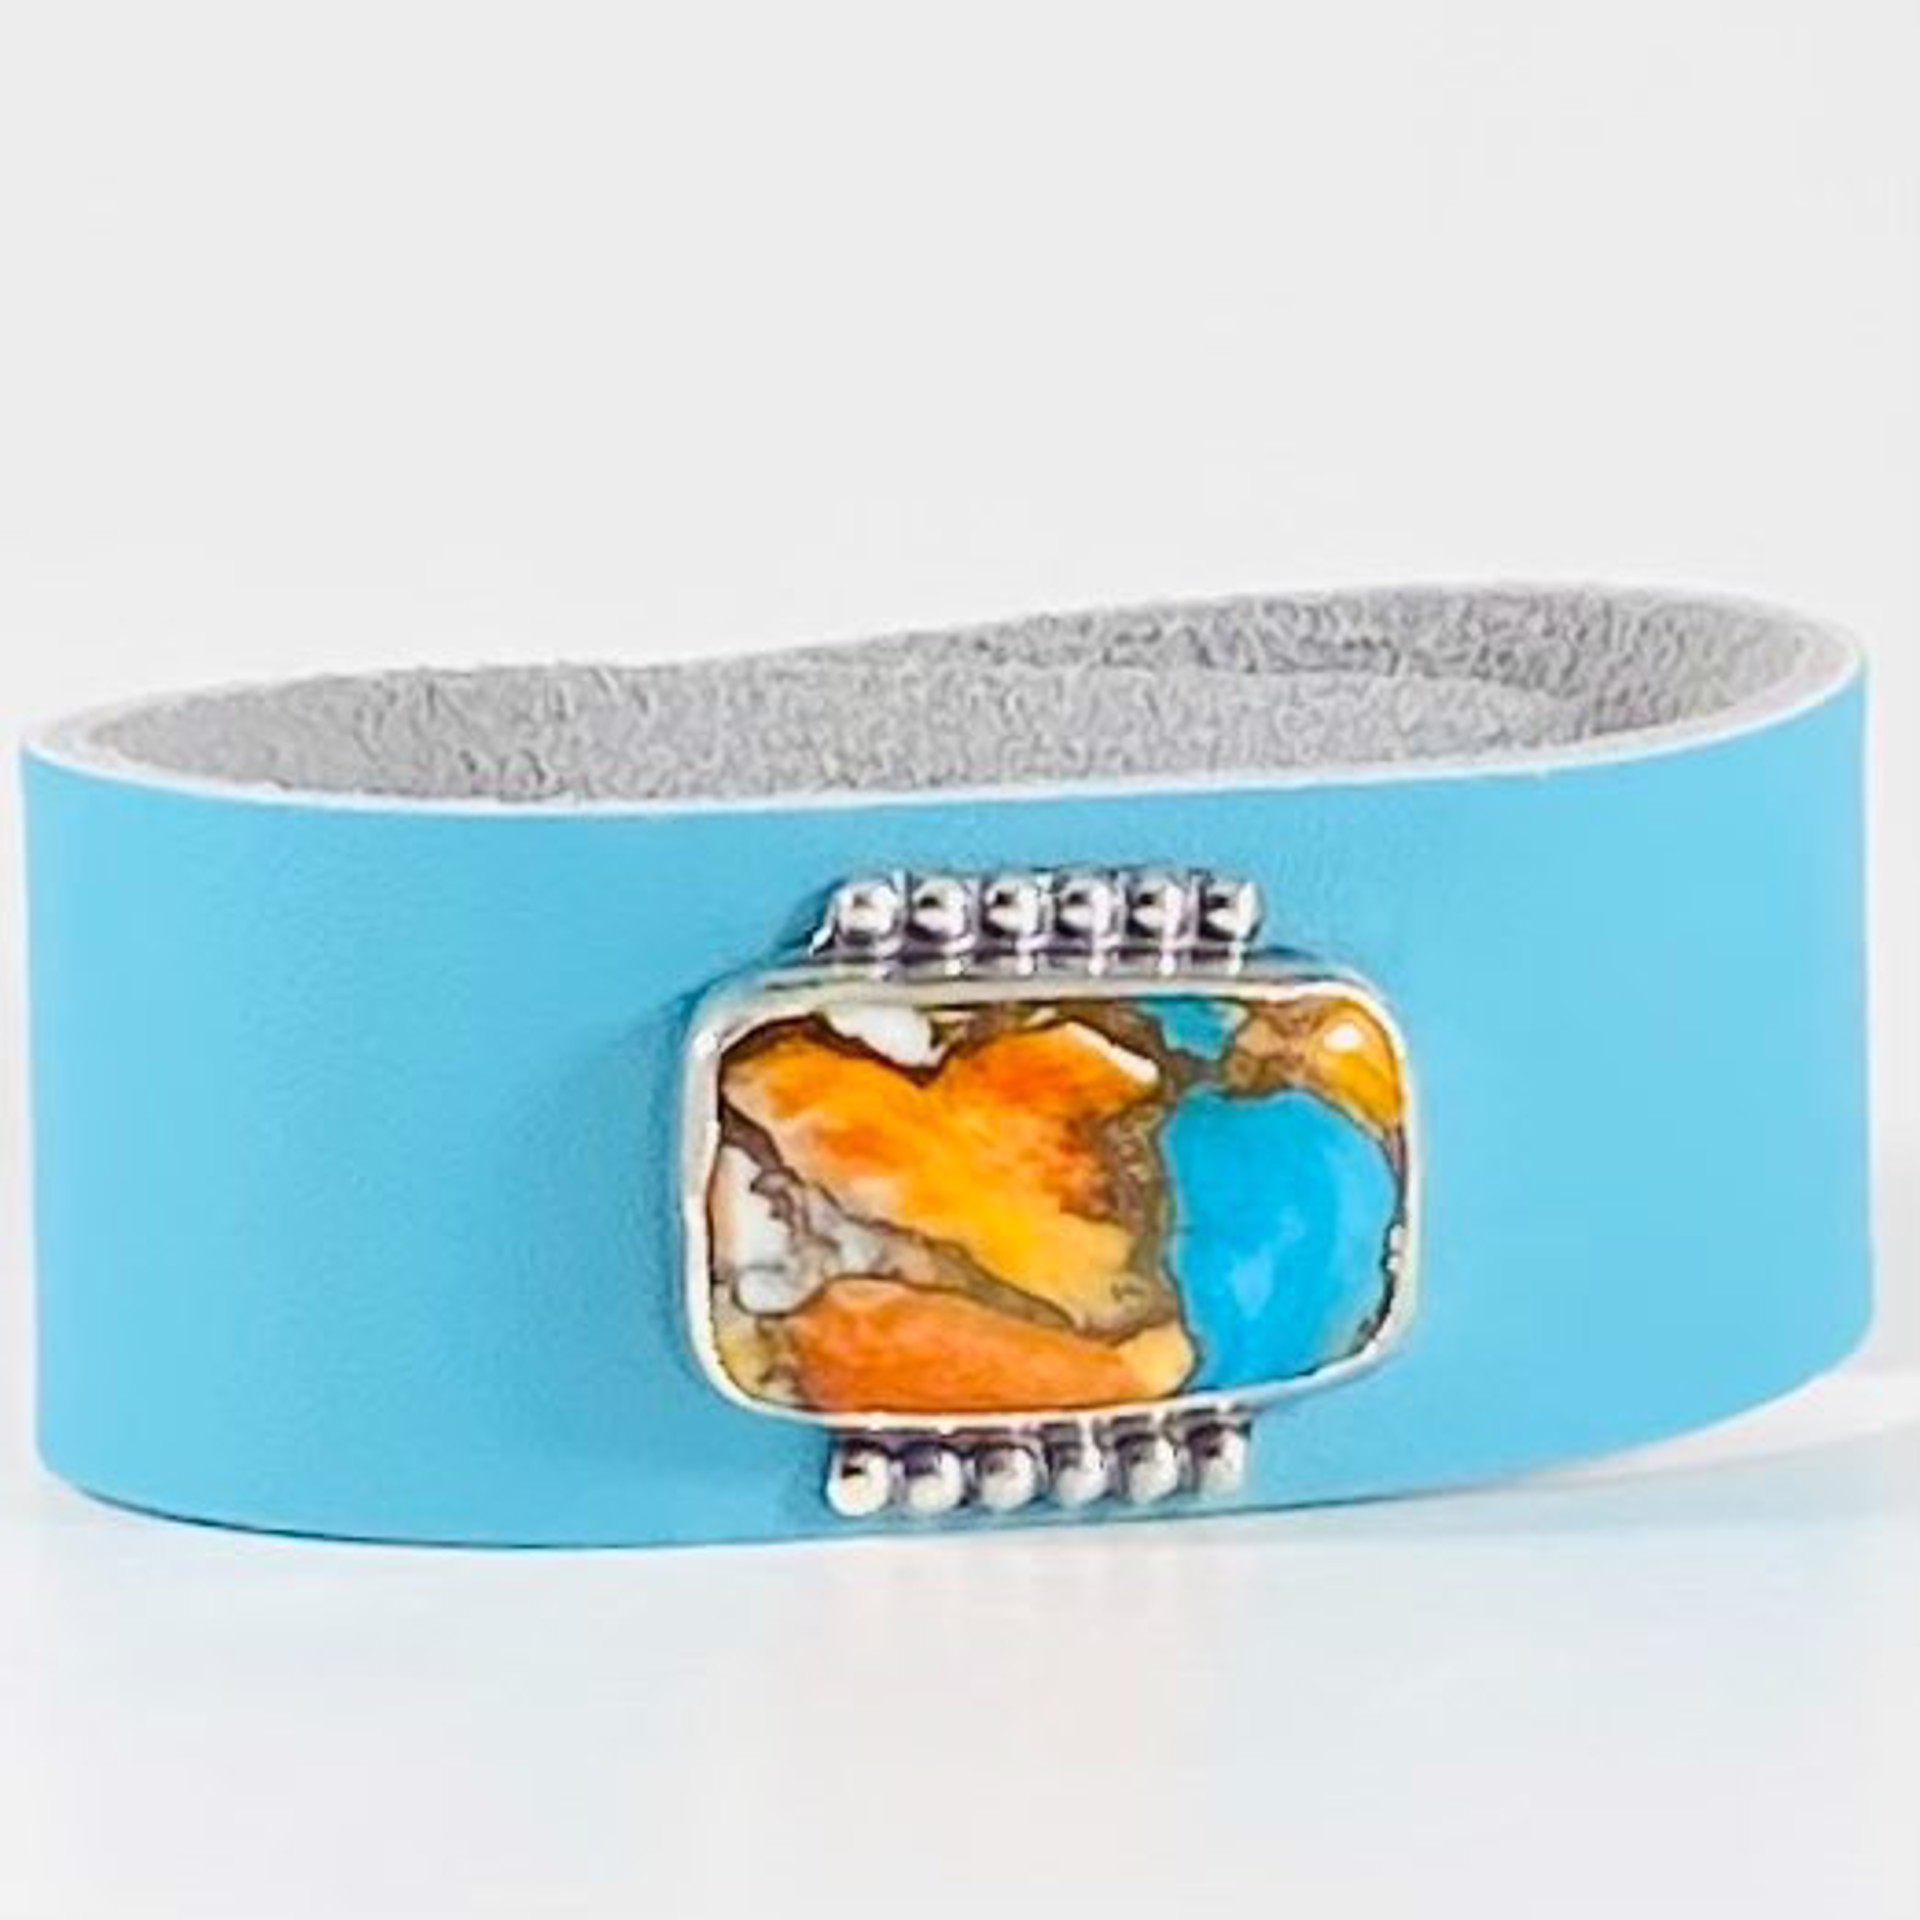 Spiney Oyster and Kingsman Turquoise with Bead accent on Teal Leather Bracelet AB22-64 by Anne Bivens